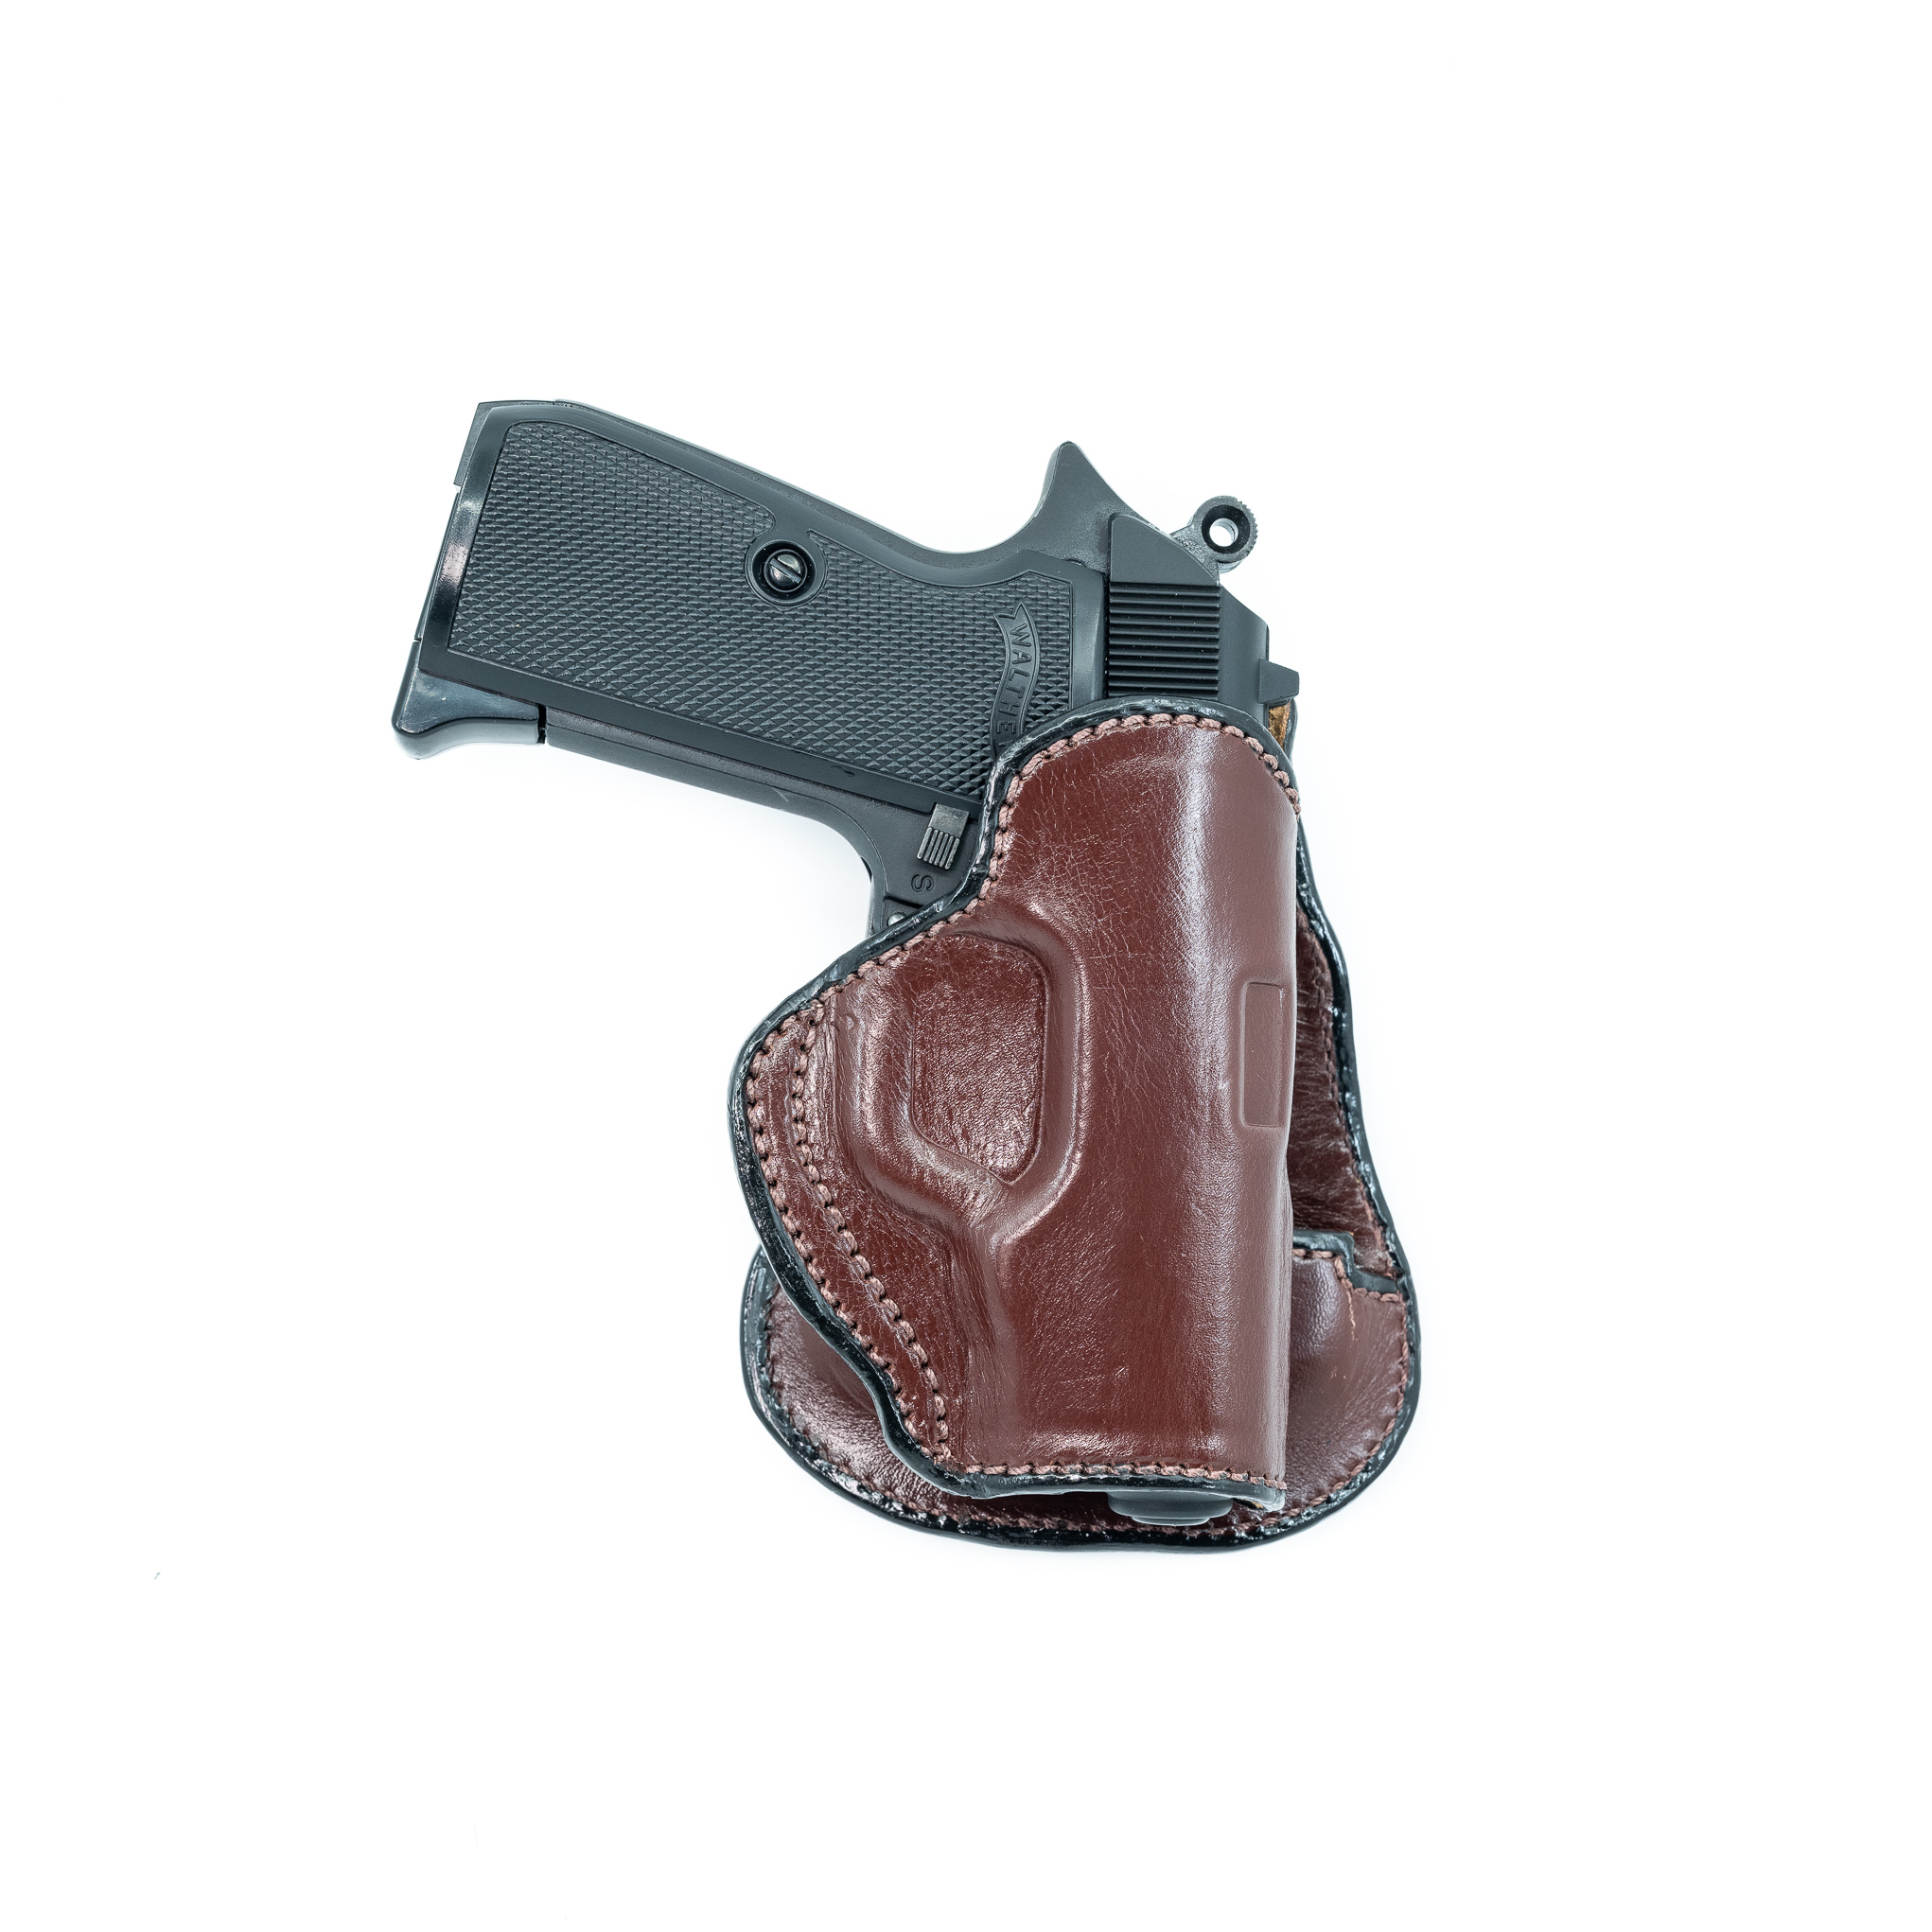 OWB PADDLE ADJUSTABLE CANT. PADDLE LEATHER HOLSTER FOR HK P30